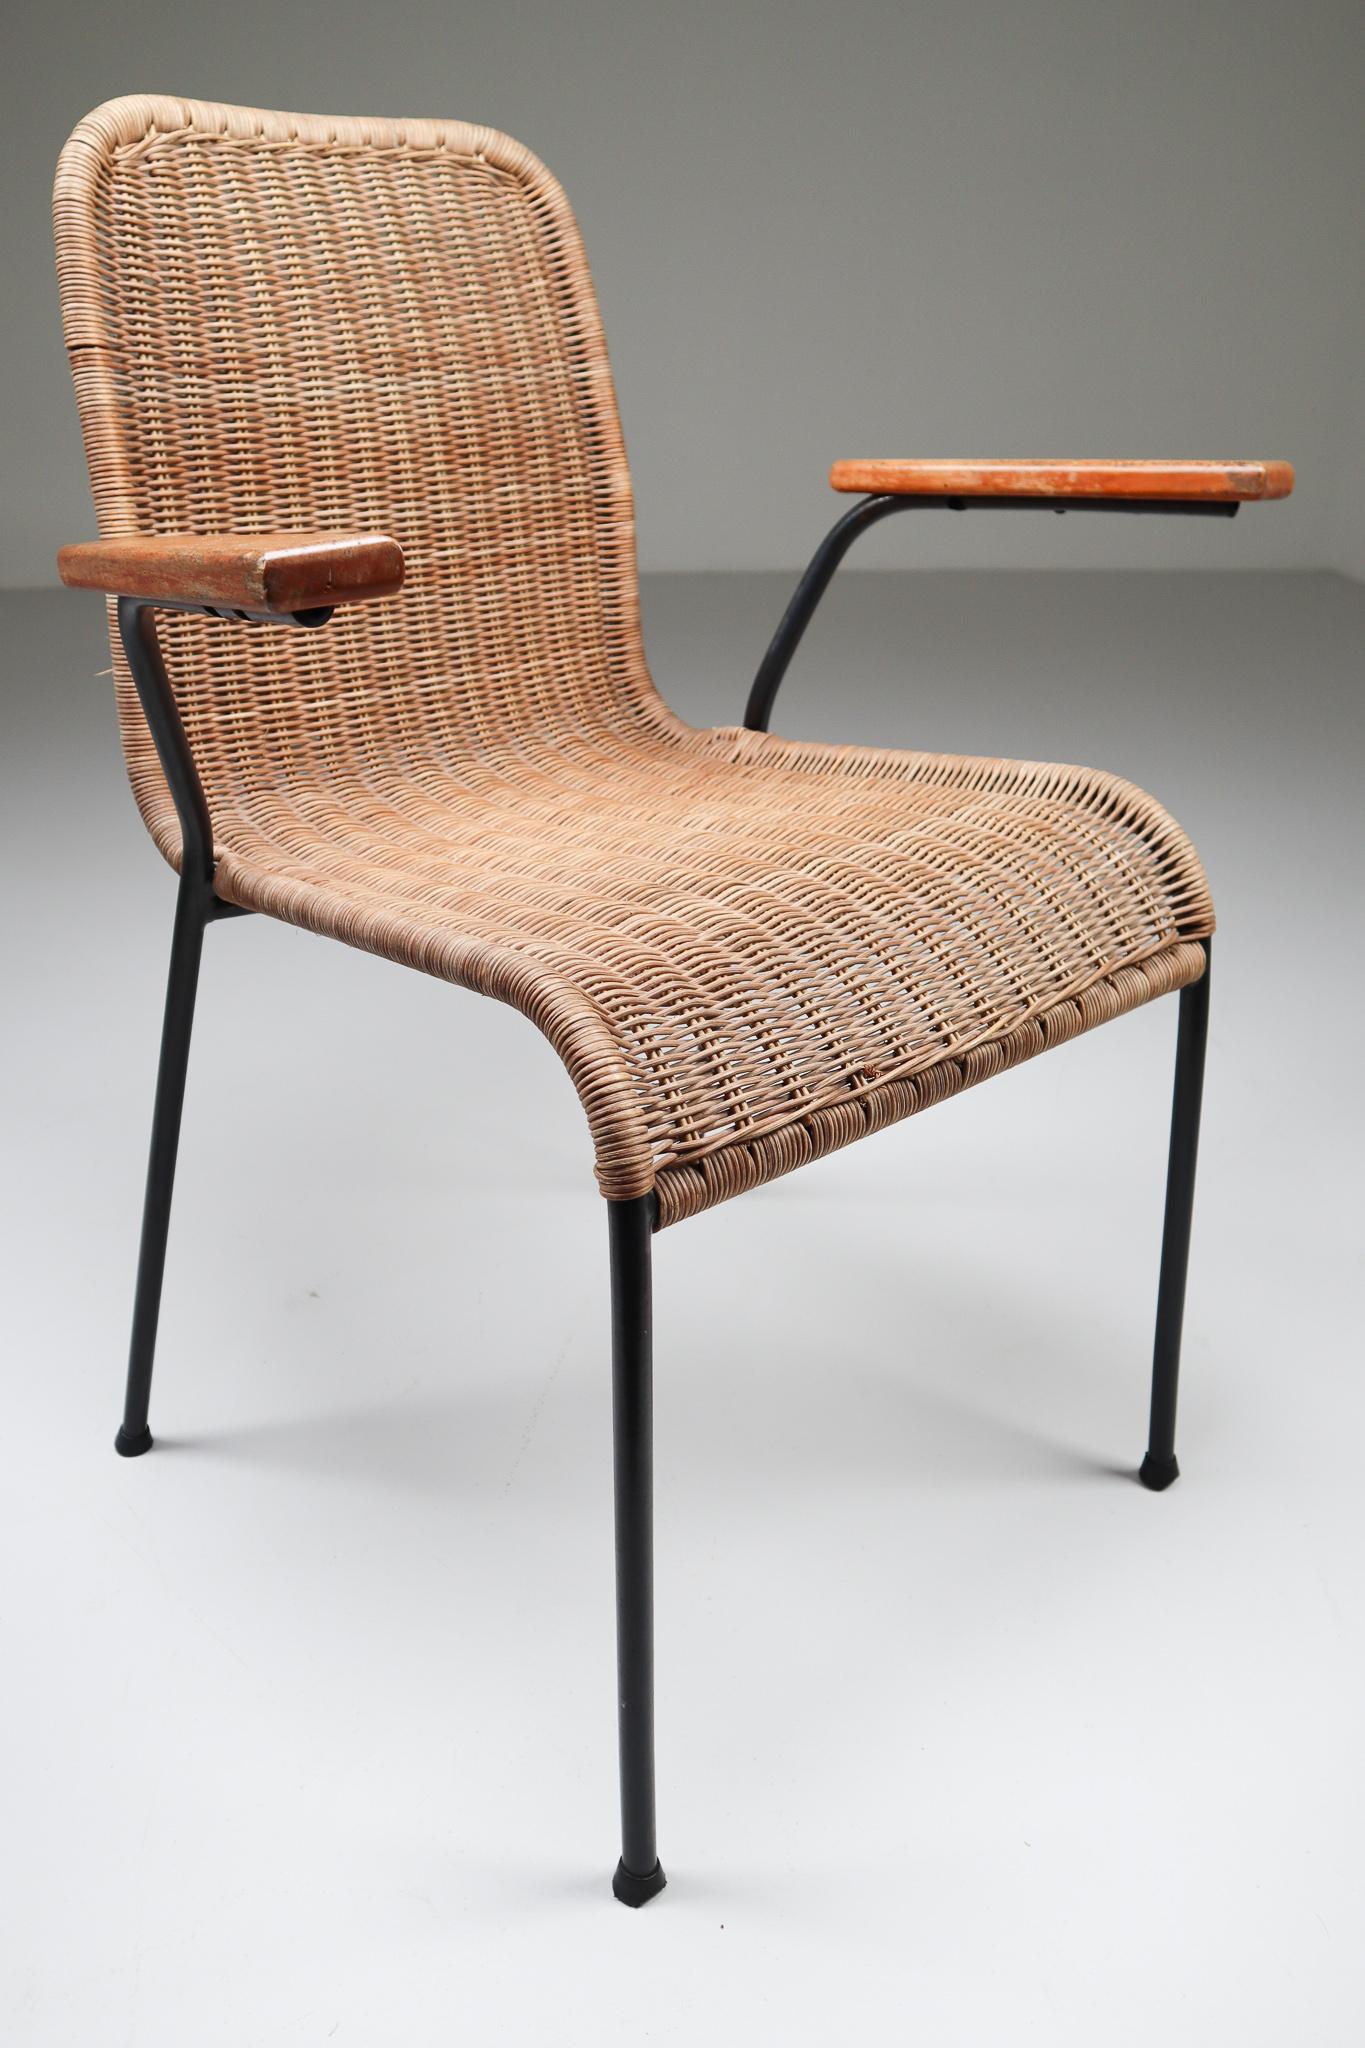 Patinated woven wicker midcentury armchairs designed and produced in The Netherlands during the 1950s. The chair is made from handwoven wicker for the seat and he frame is made of black lacquered steel. They are comfortable to sit in and create an